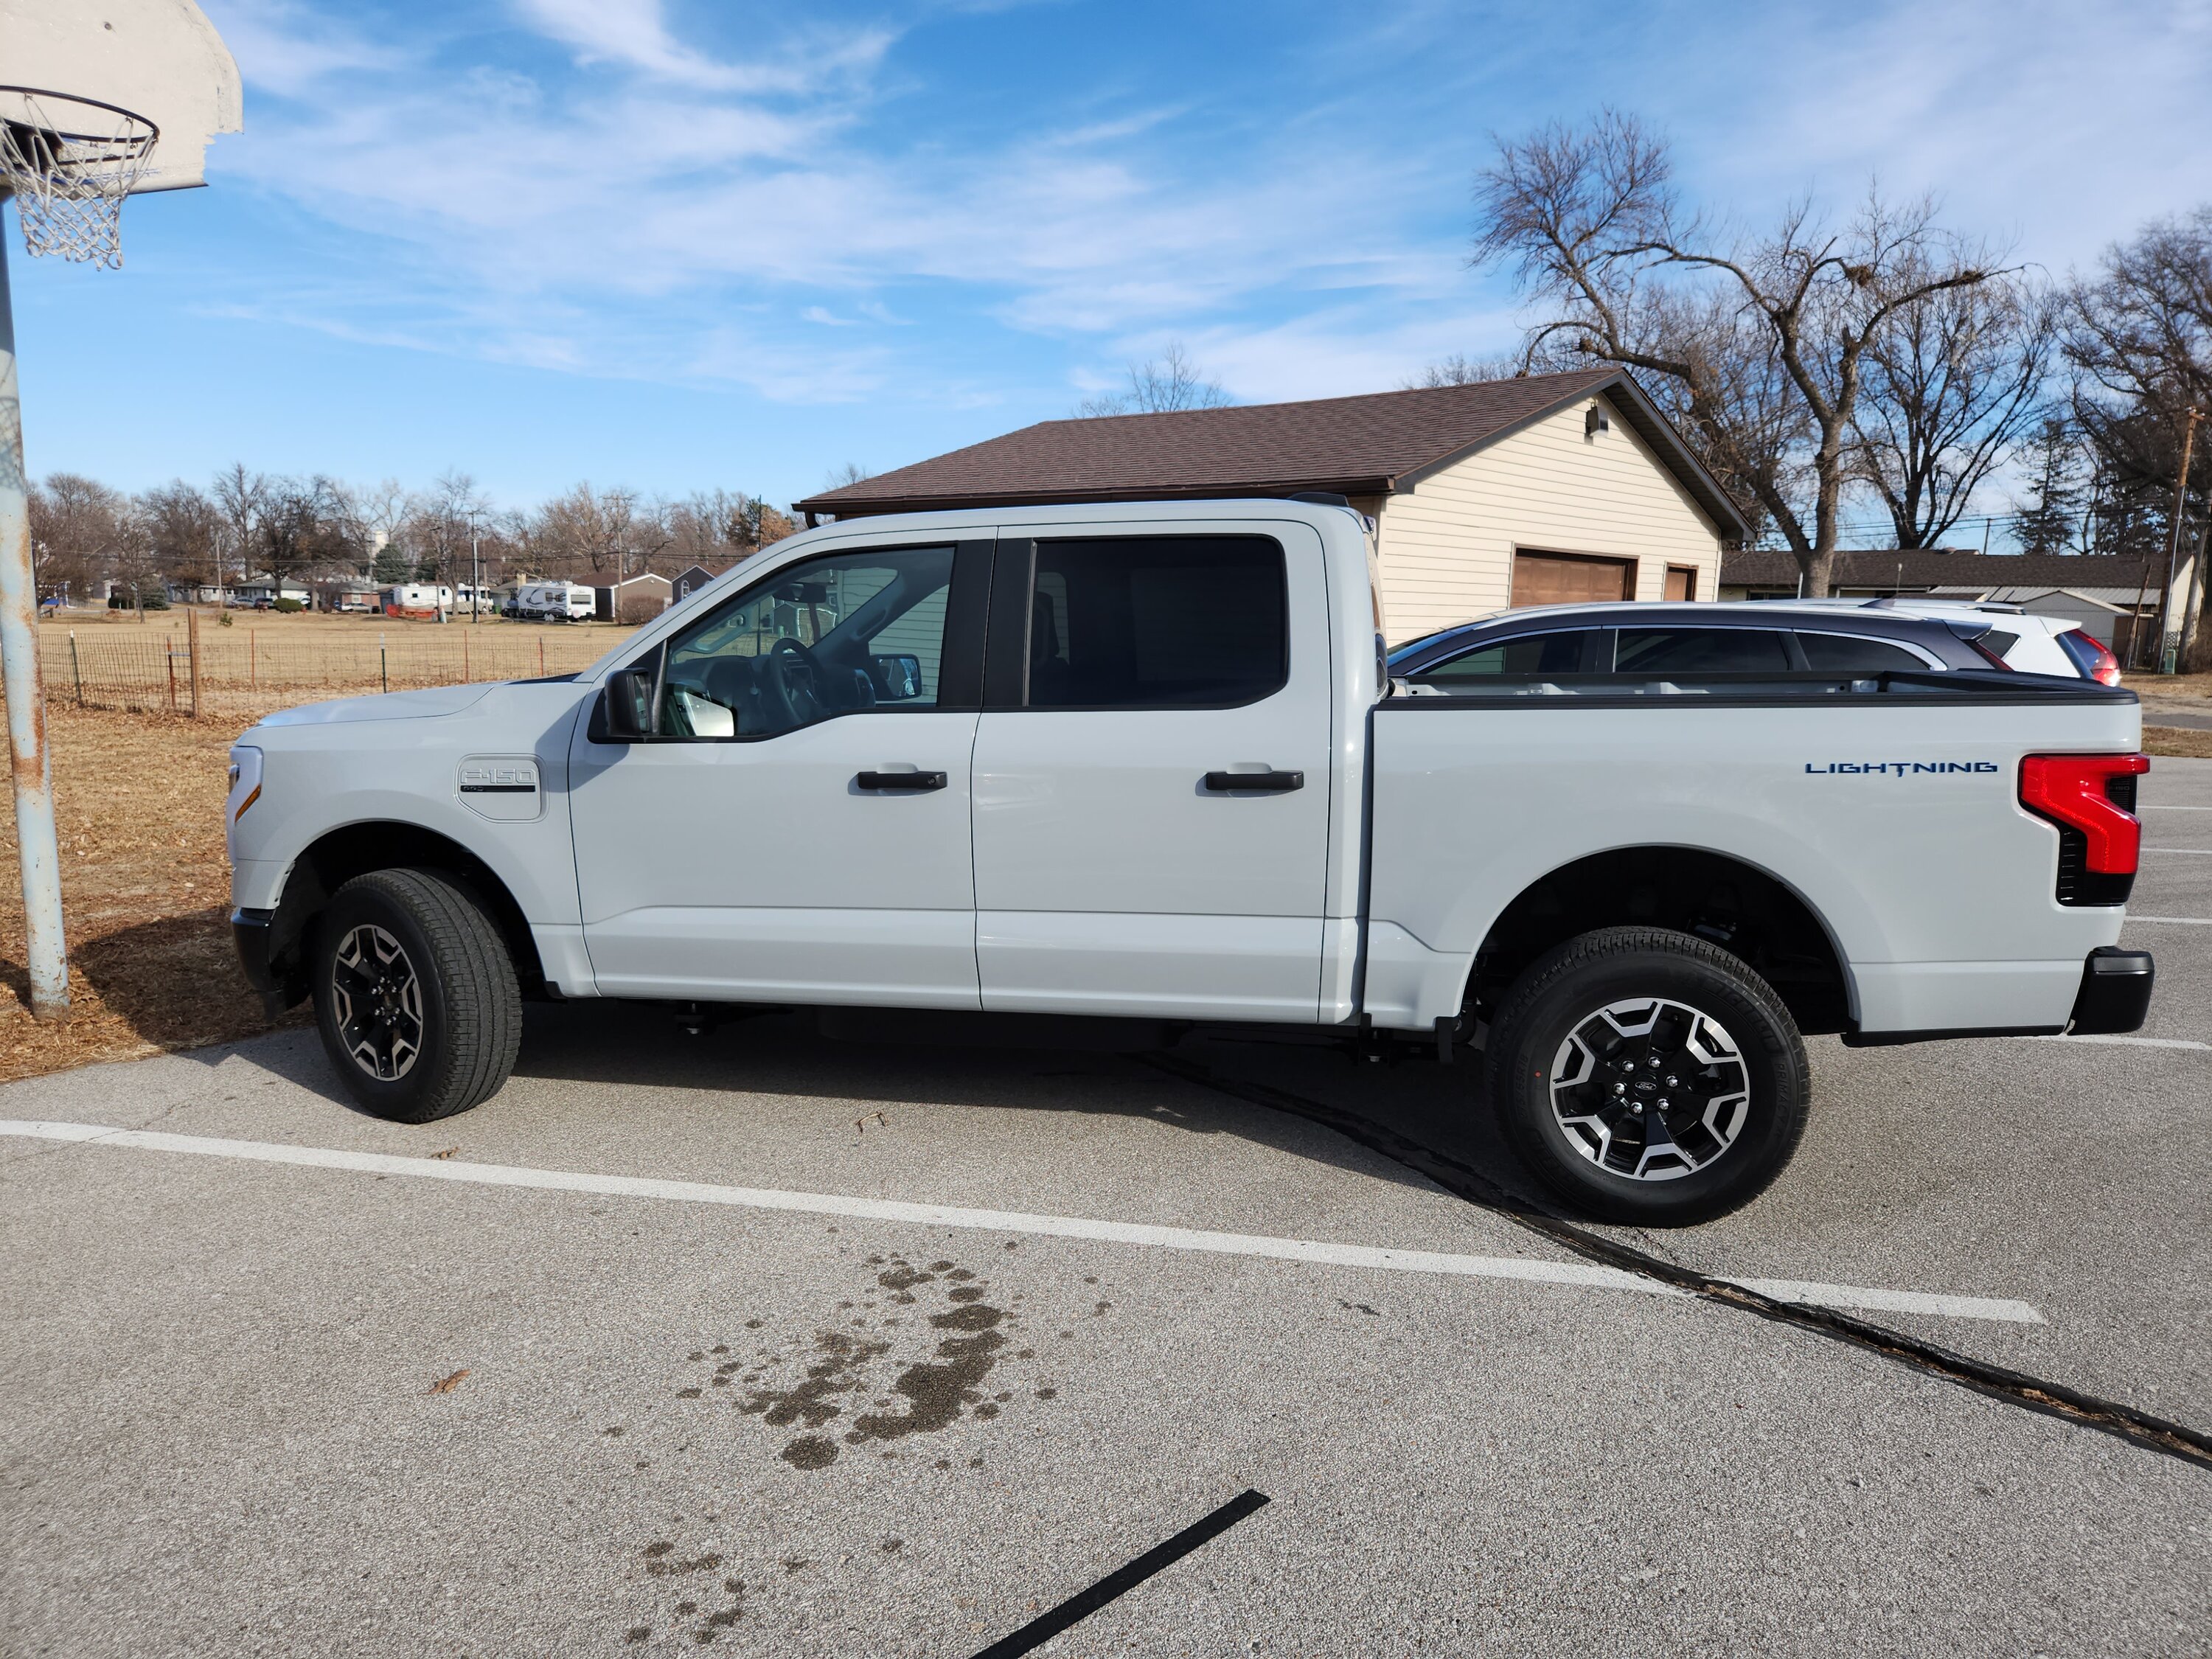 Ford F-150 Lightning 2023 Lightning New Colors: Avalanche Gray and Azure Gray Metallic (*Area 51) 20221203_121518